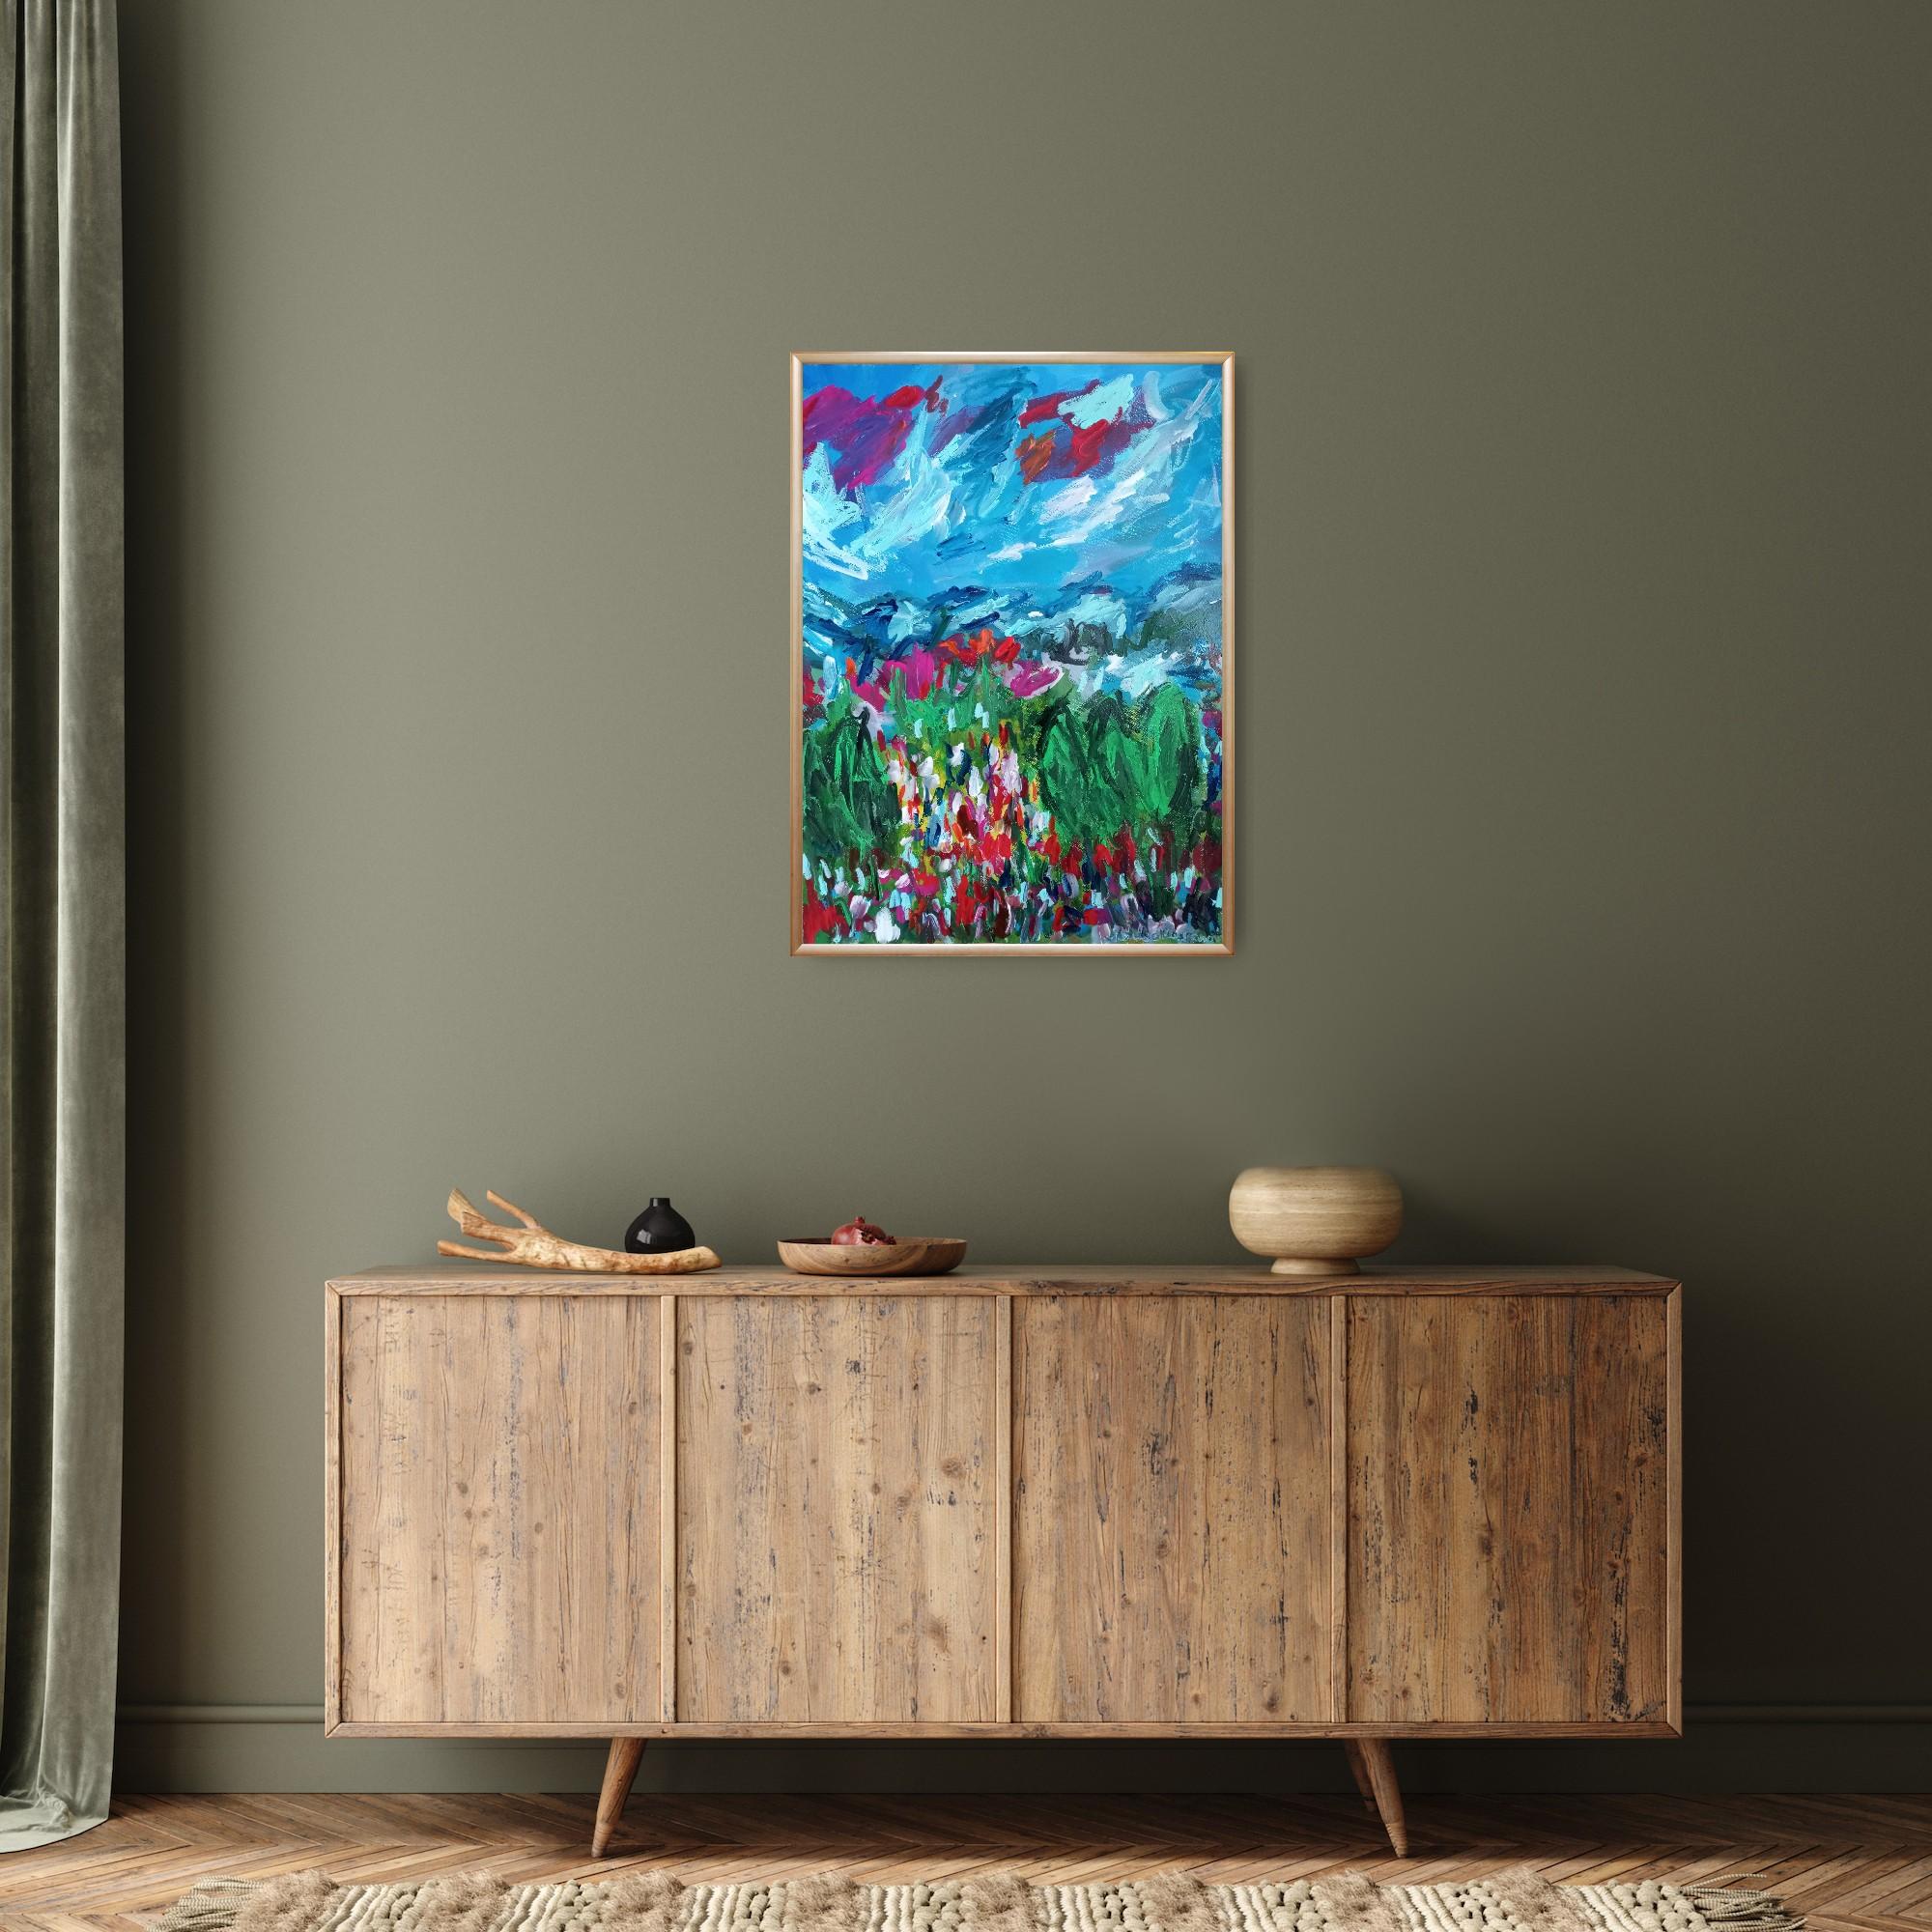 This acrylic painting makes part of my series dedicated to the scenes of a summer period.

This abstract vibrant floral painting with summer flowers in a blue vase   called 